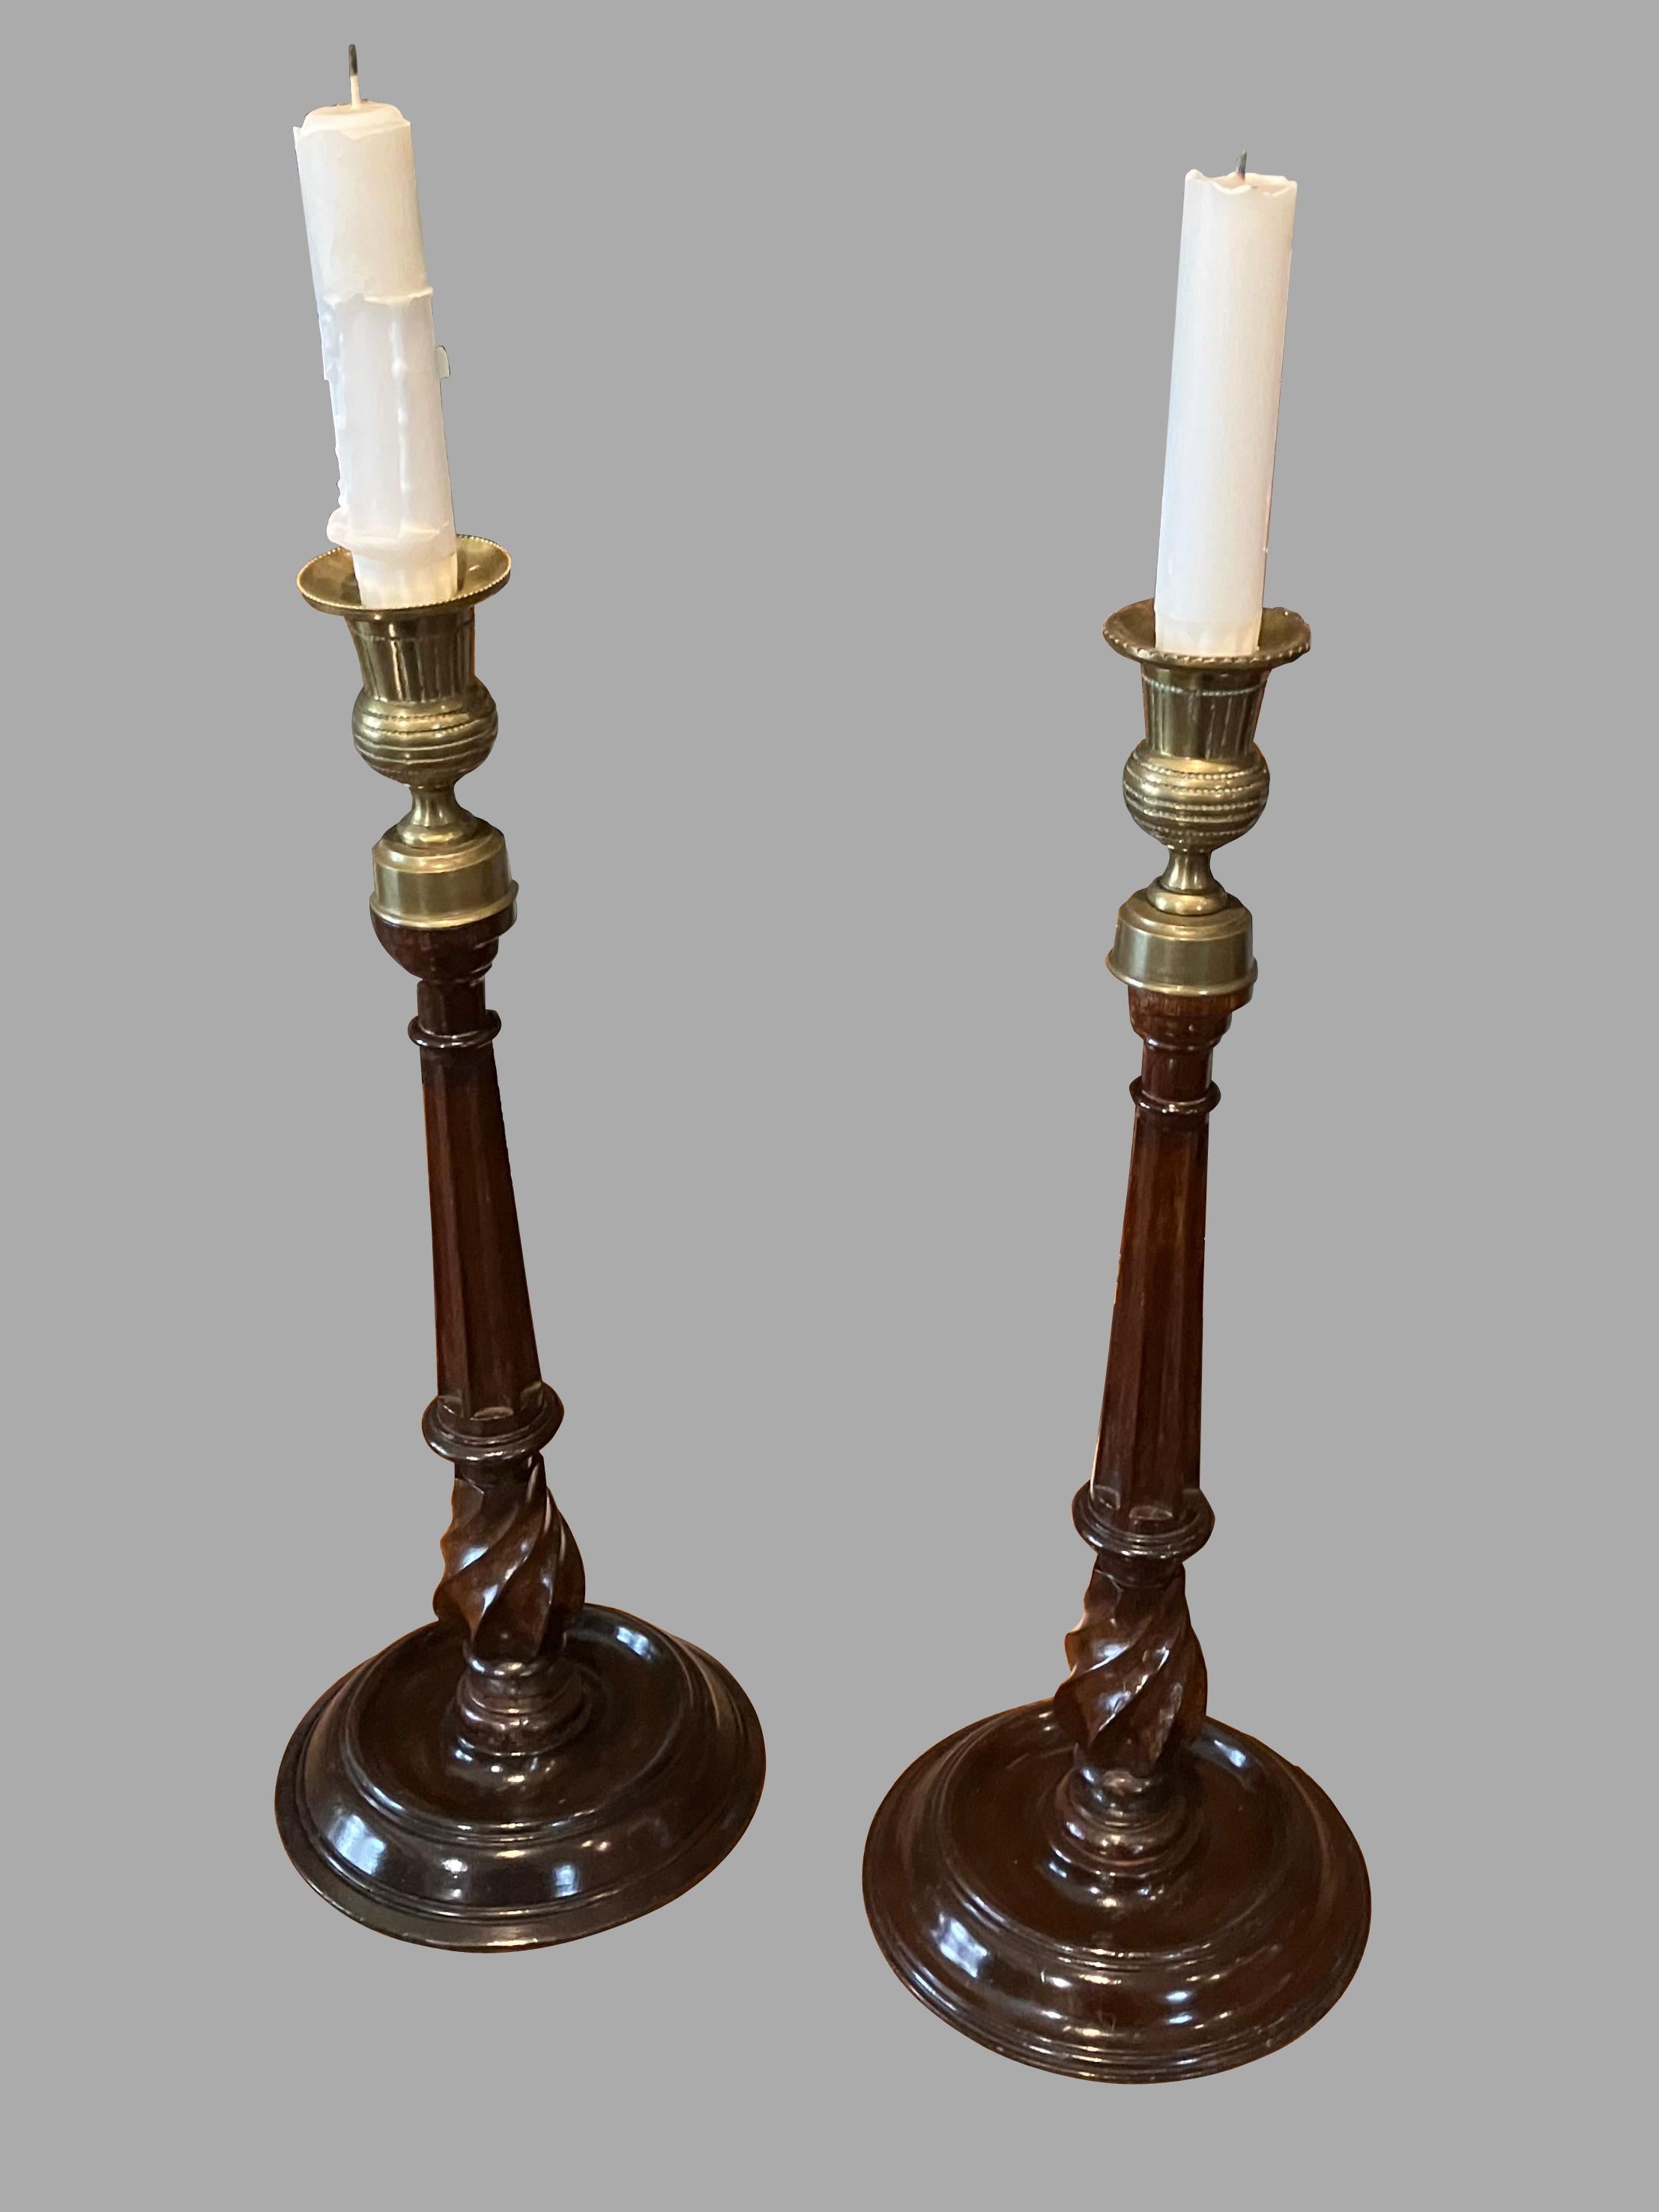 A good pair of English Georgian style mahogany and brass candlesticks, the brass nozzles supported on reeded mahogany columns ending in turned circular bases. This style of candlestick first appeared in the 18th century and has remained popular ever